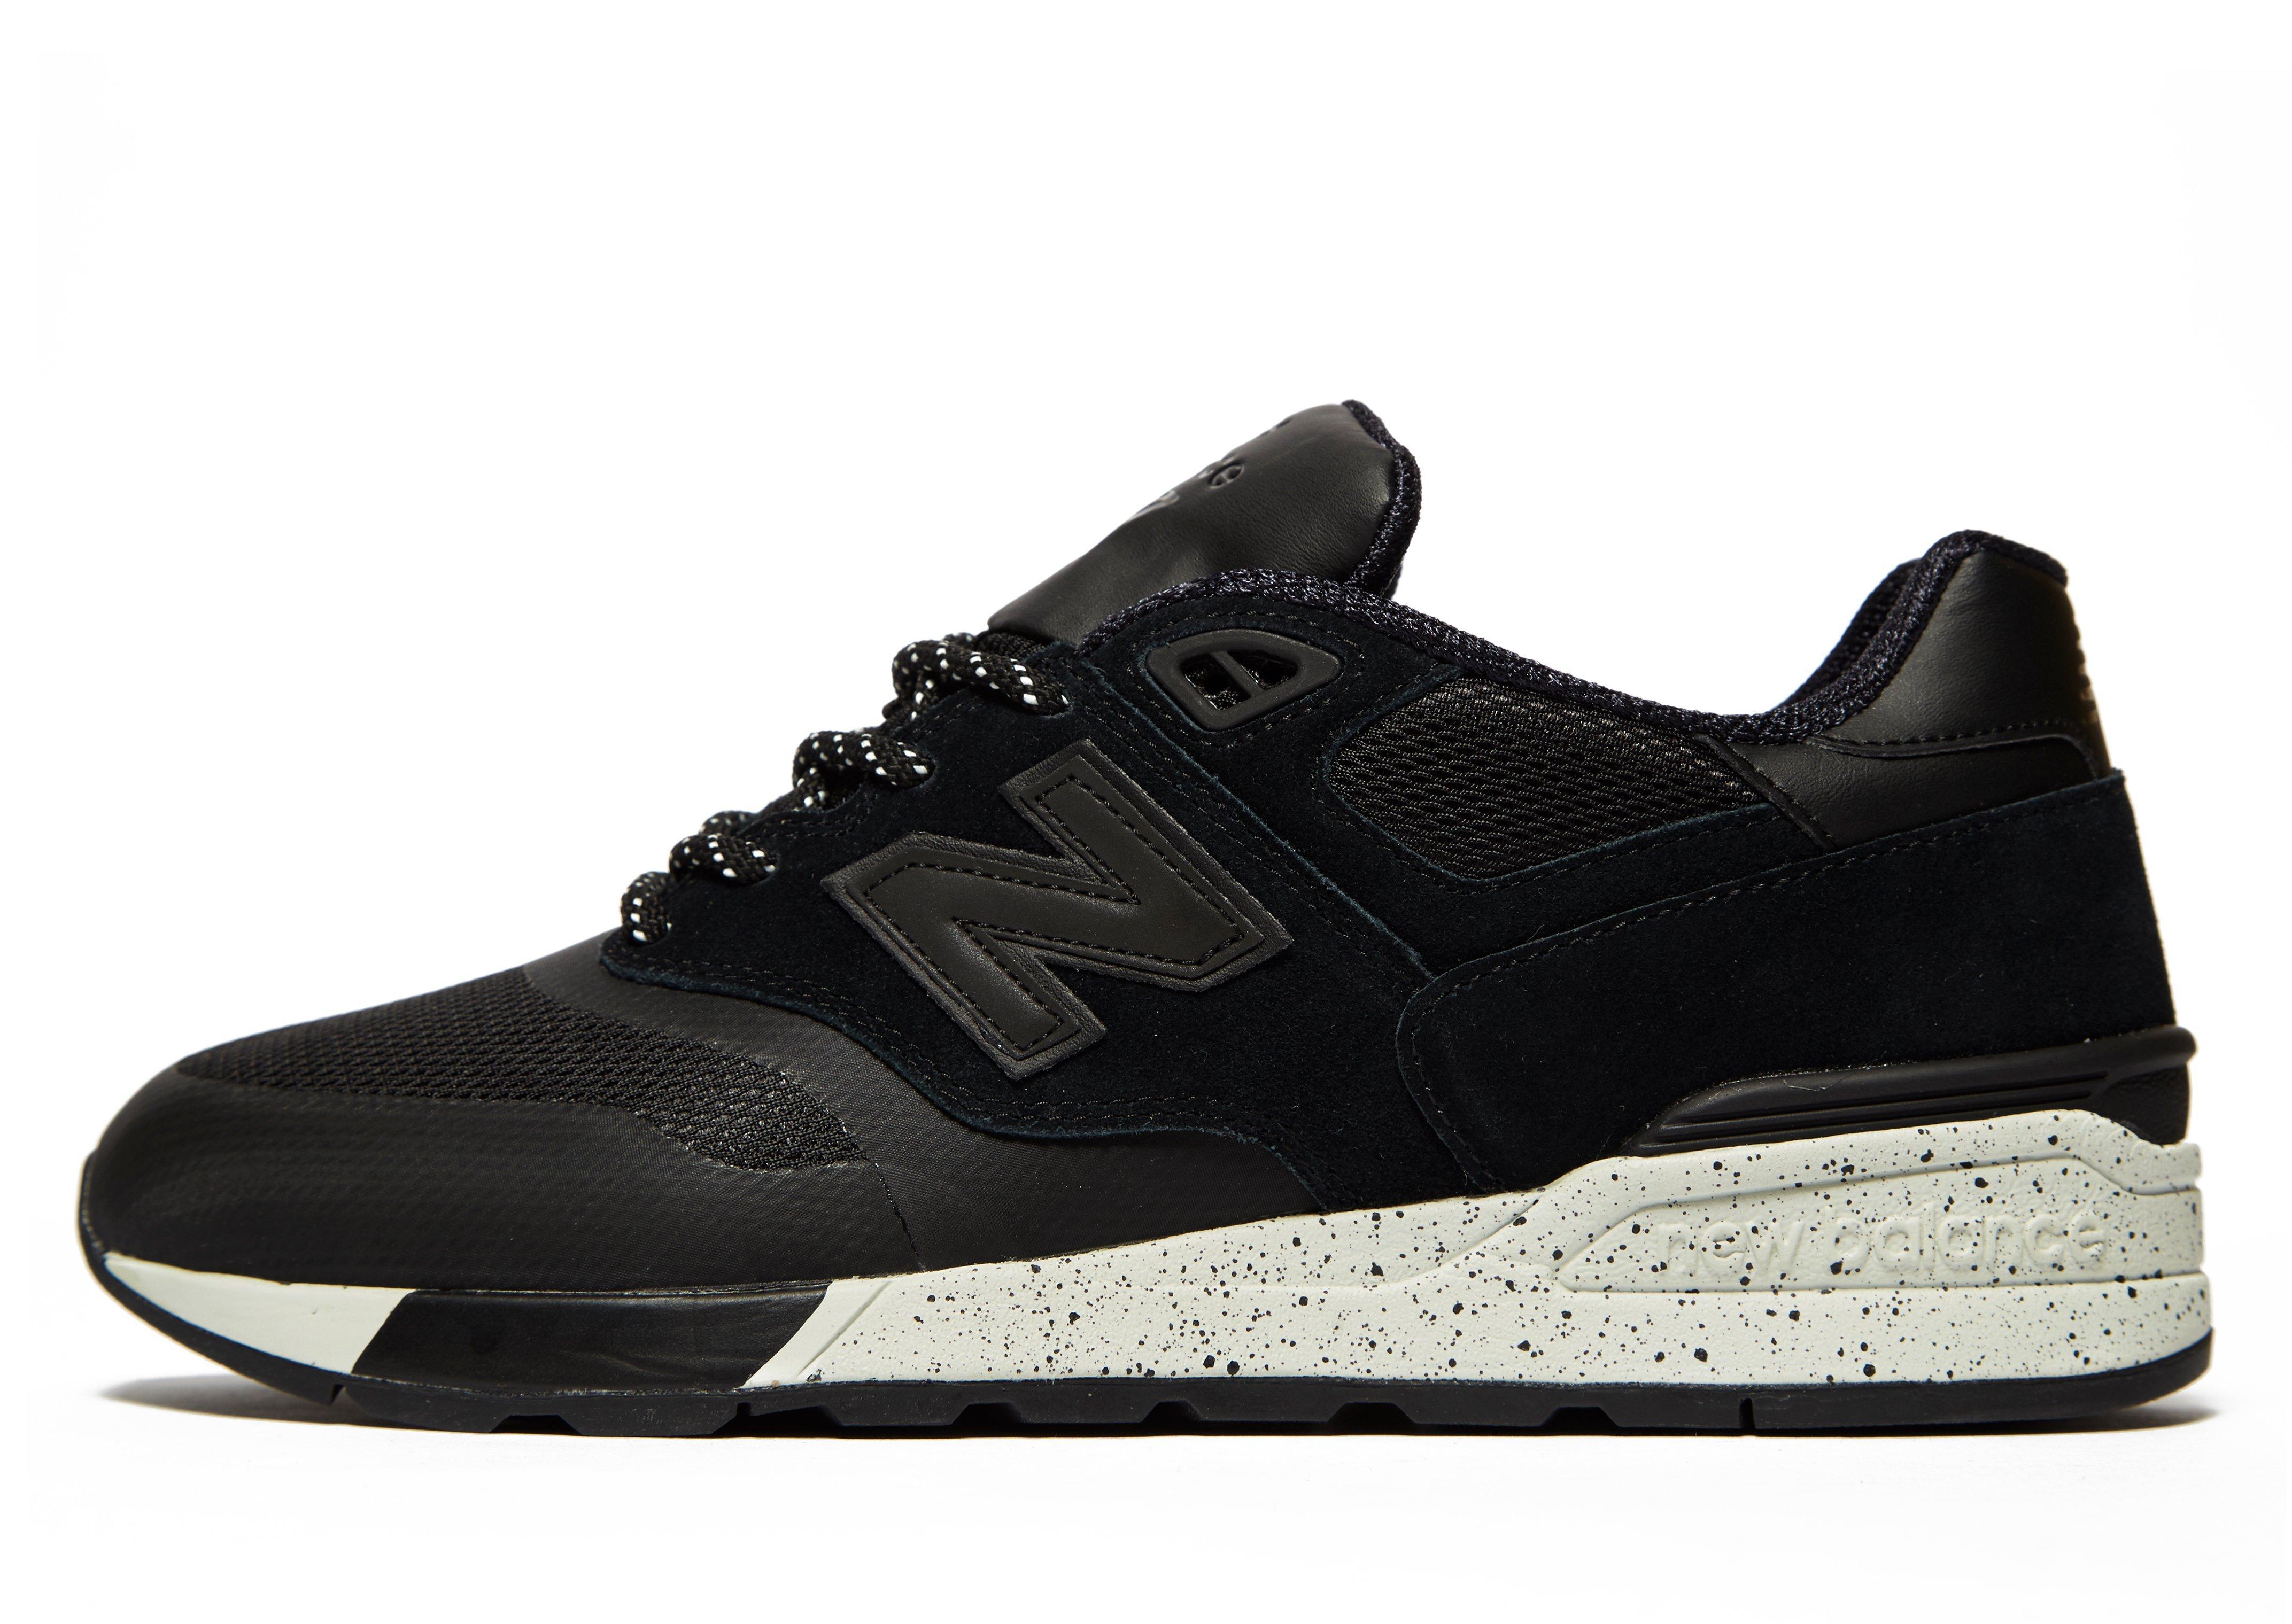 New Balance Suede 597 Blk/wht in Black/White (Black) for Men - Lyst